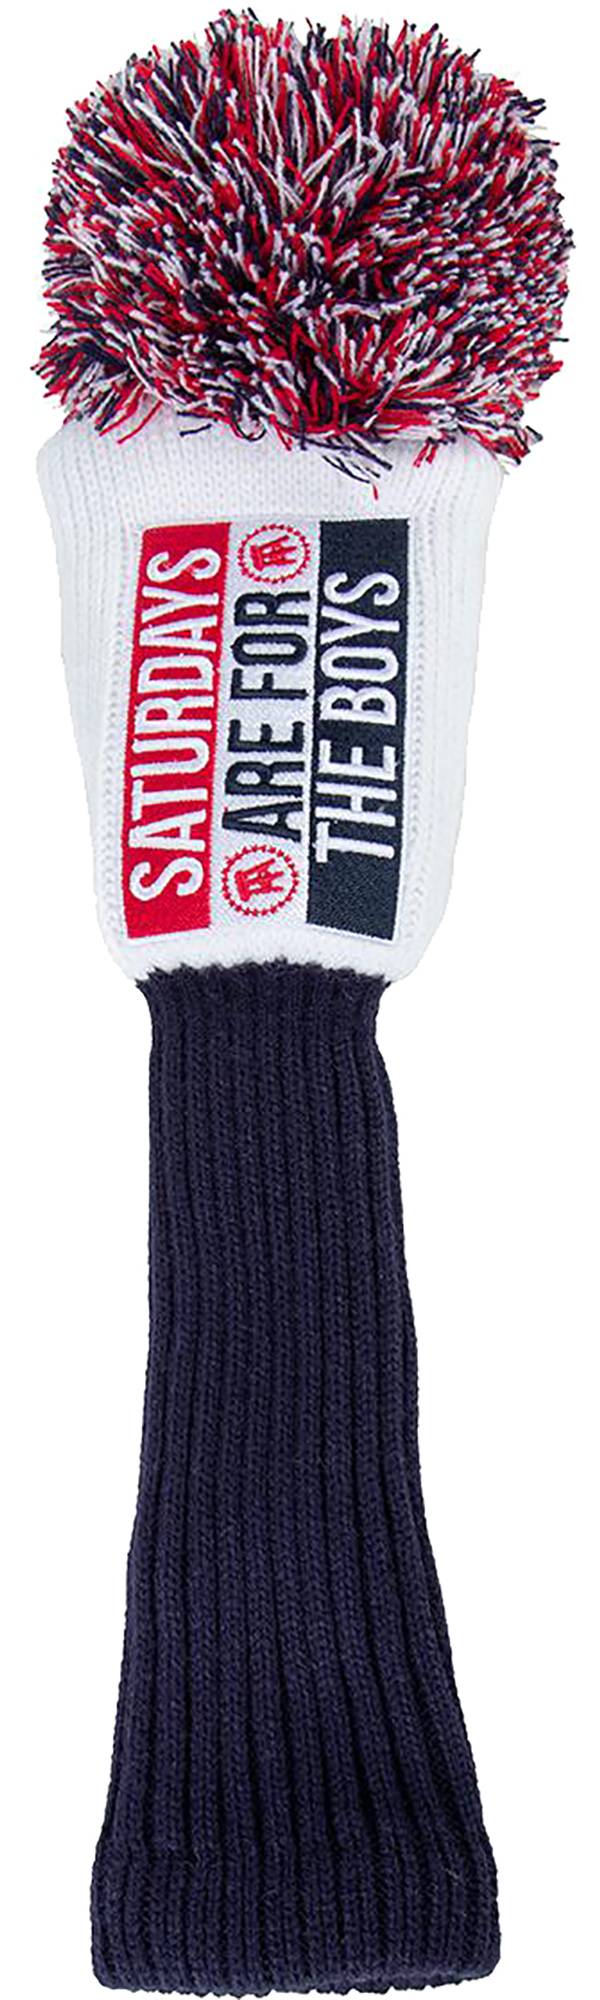 Barstool Sports SAFTB Knit Driver Headcover product image